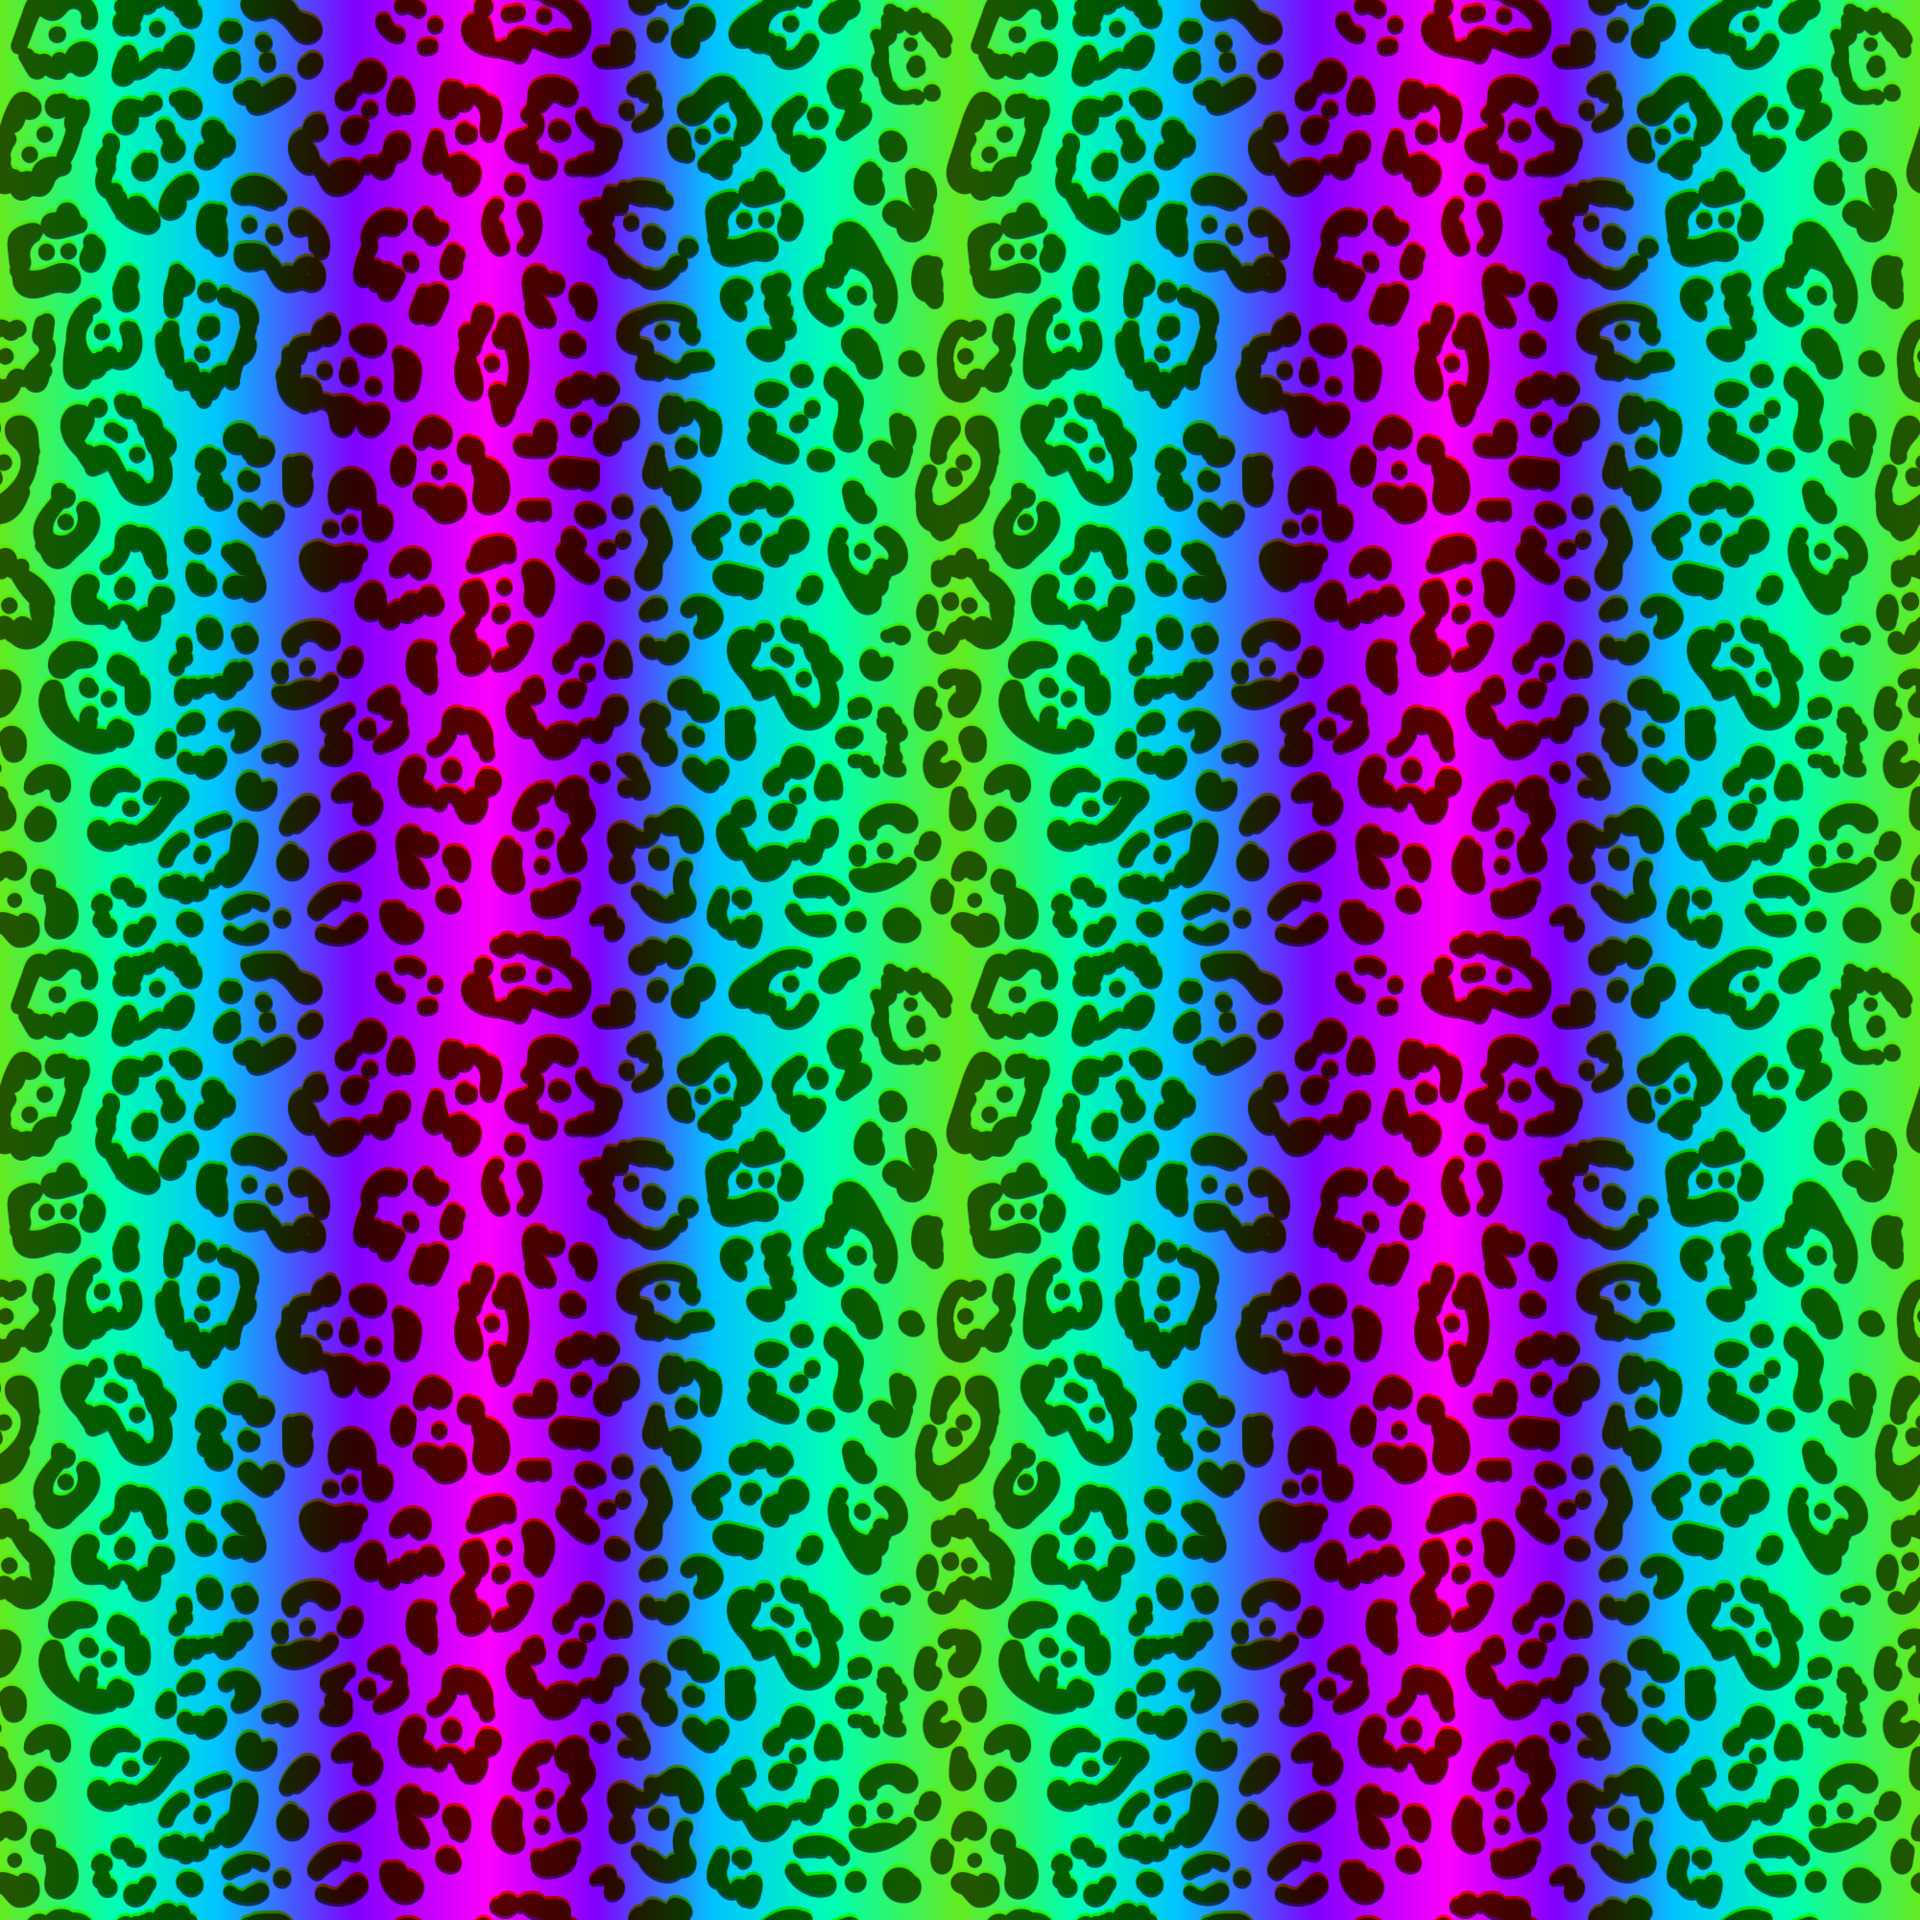 Neon leopard seamless pattern. Bright colored spotted background